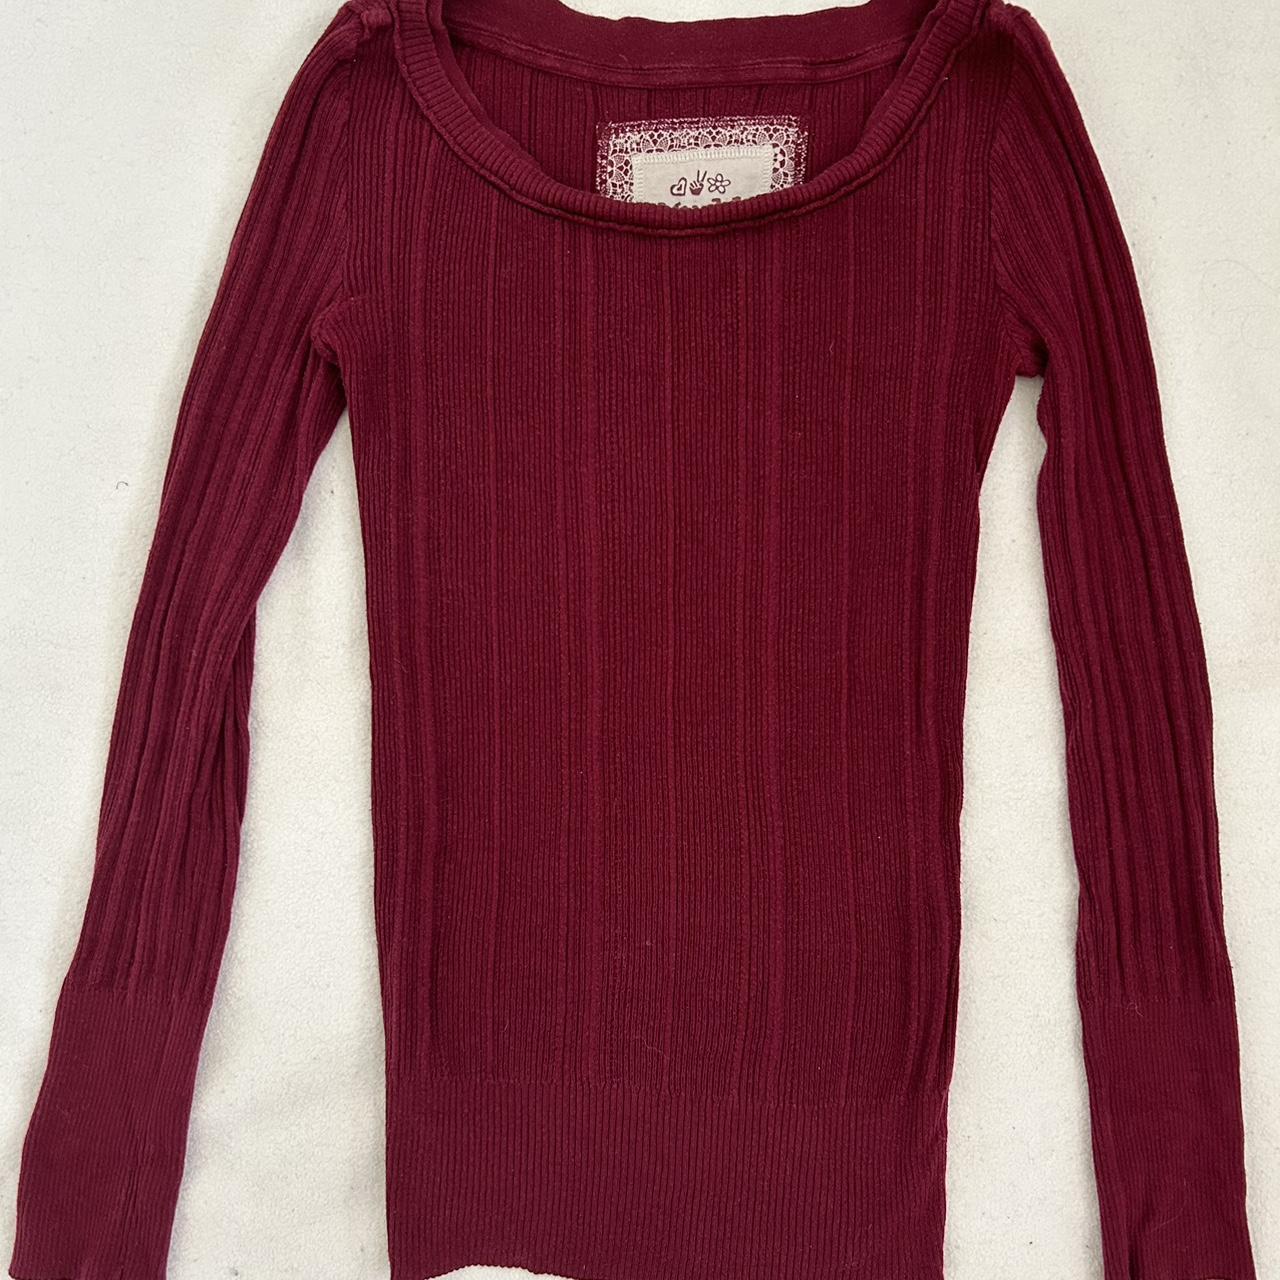 Mudd Clothing Women's Red and Burgundy Jumper | Depop